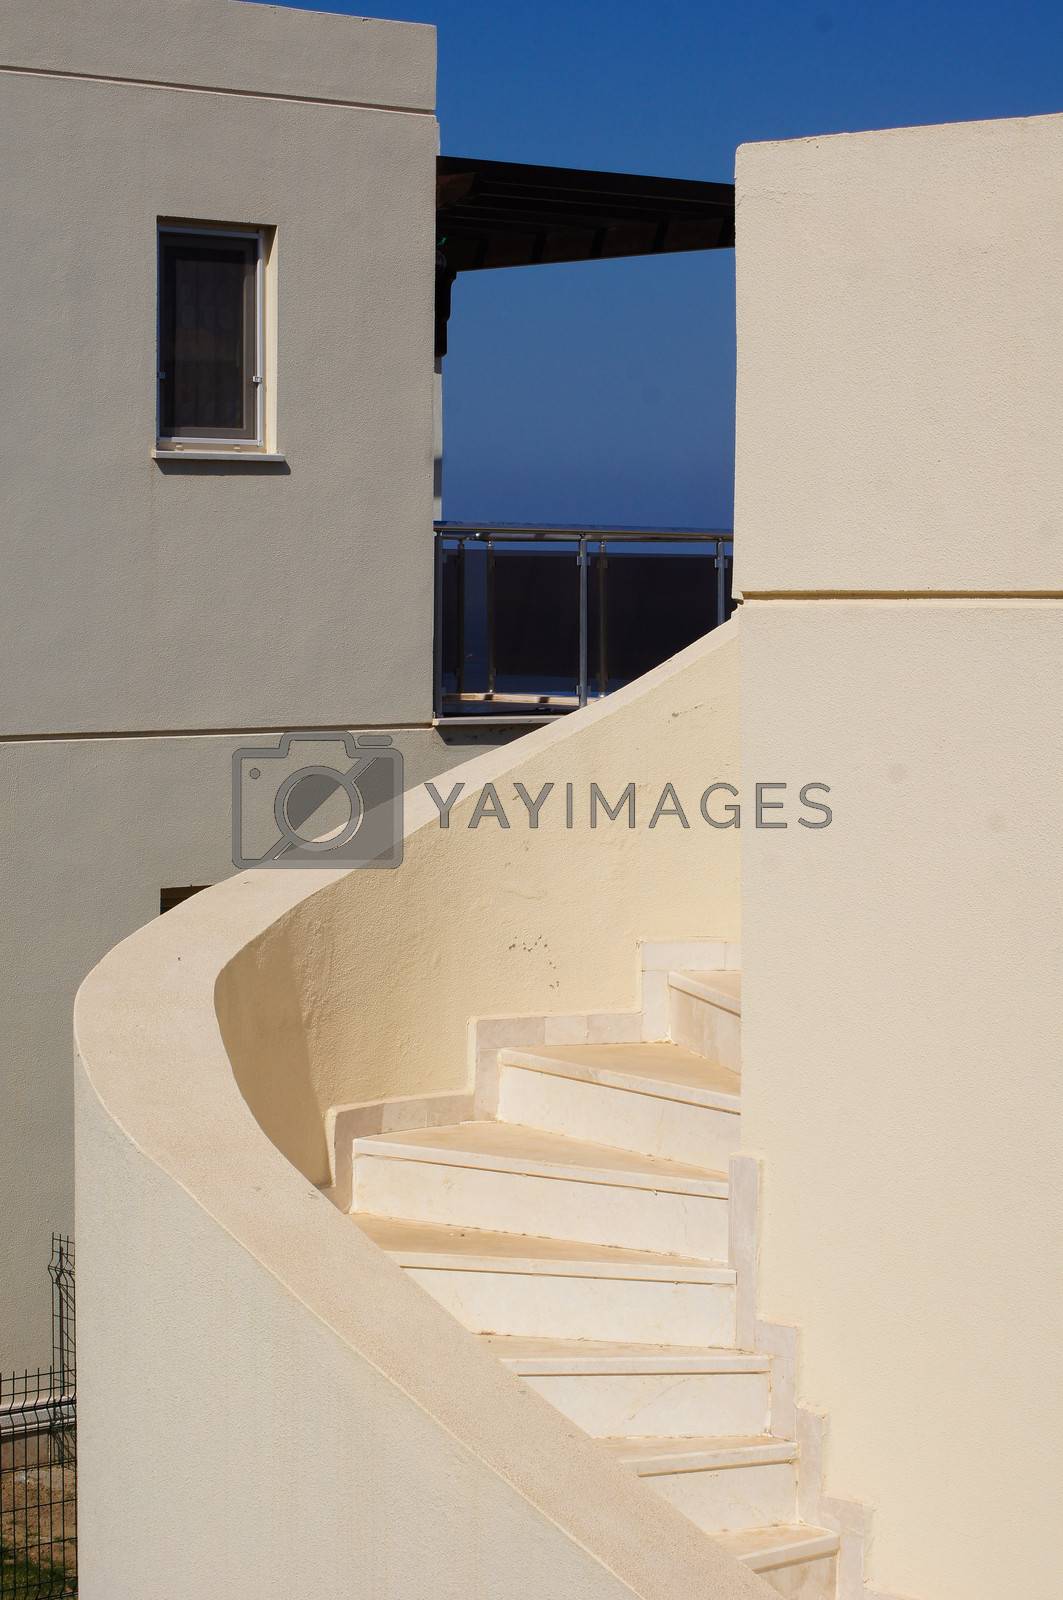 Royalty free image of Aegean architecture by Elet